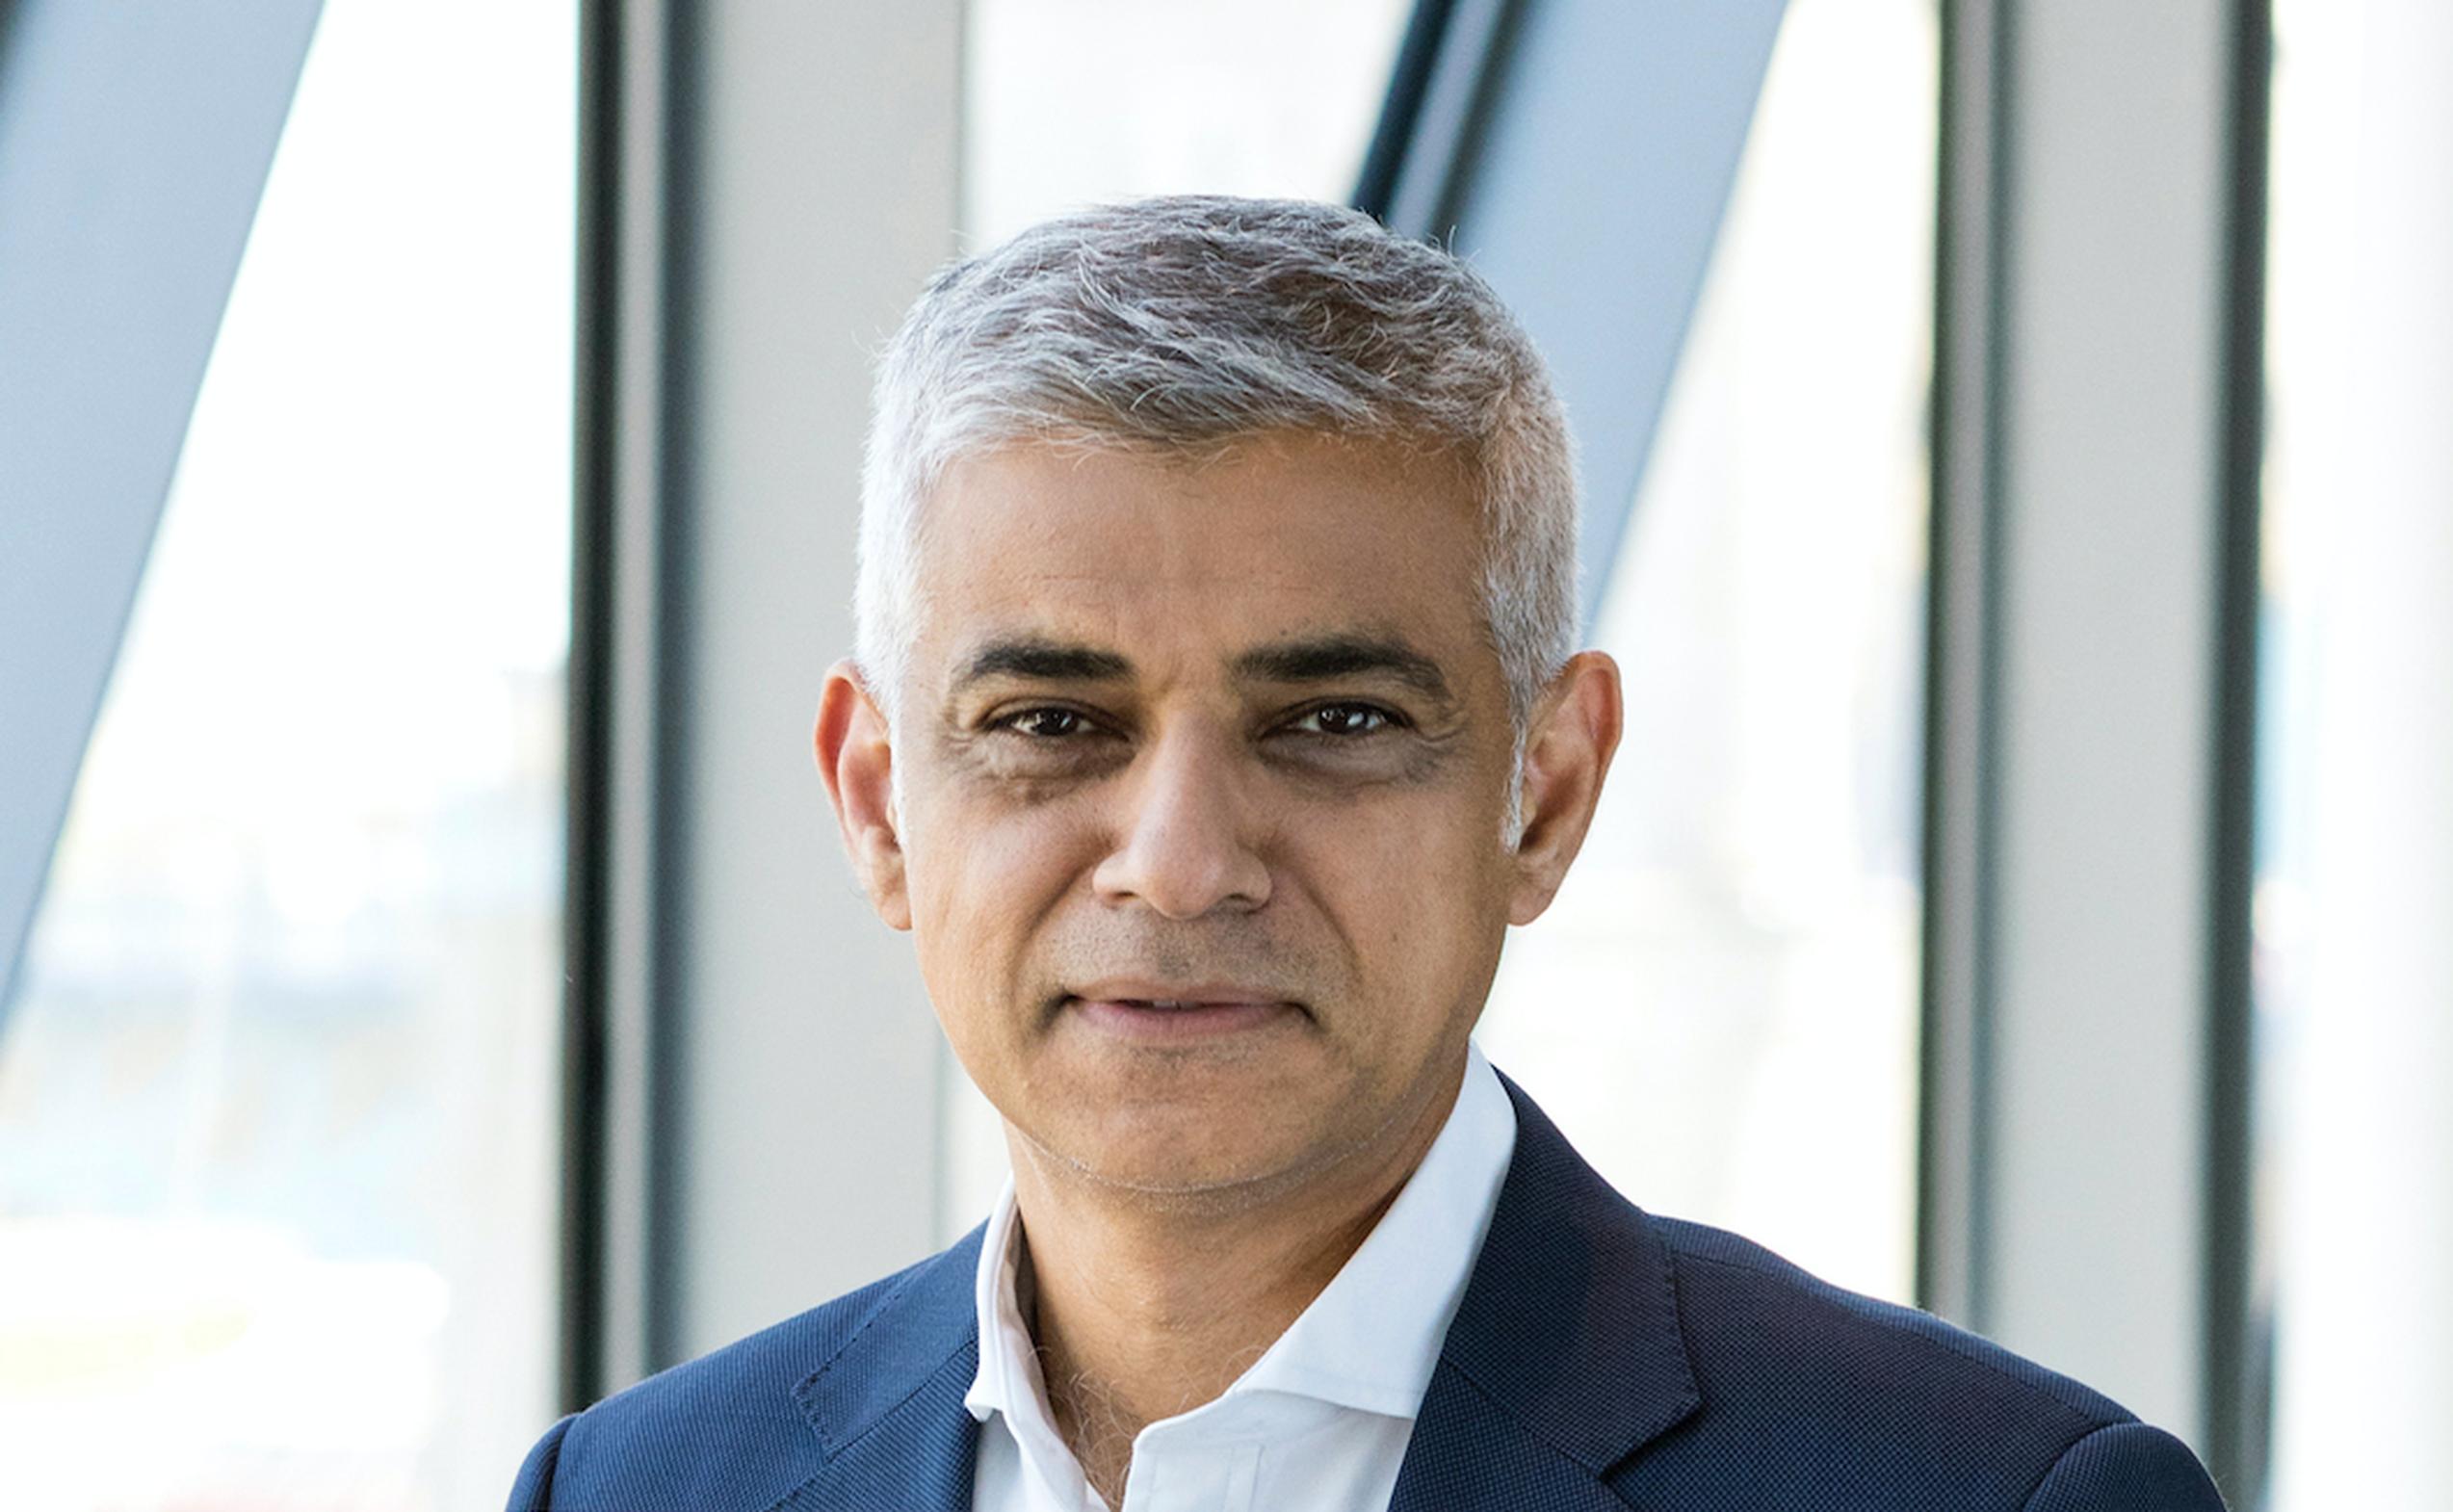 London Mayor spells out impact of funding crisis on transport services